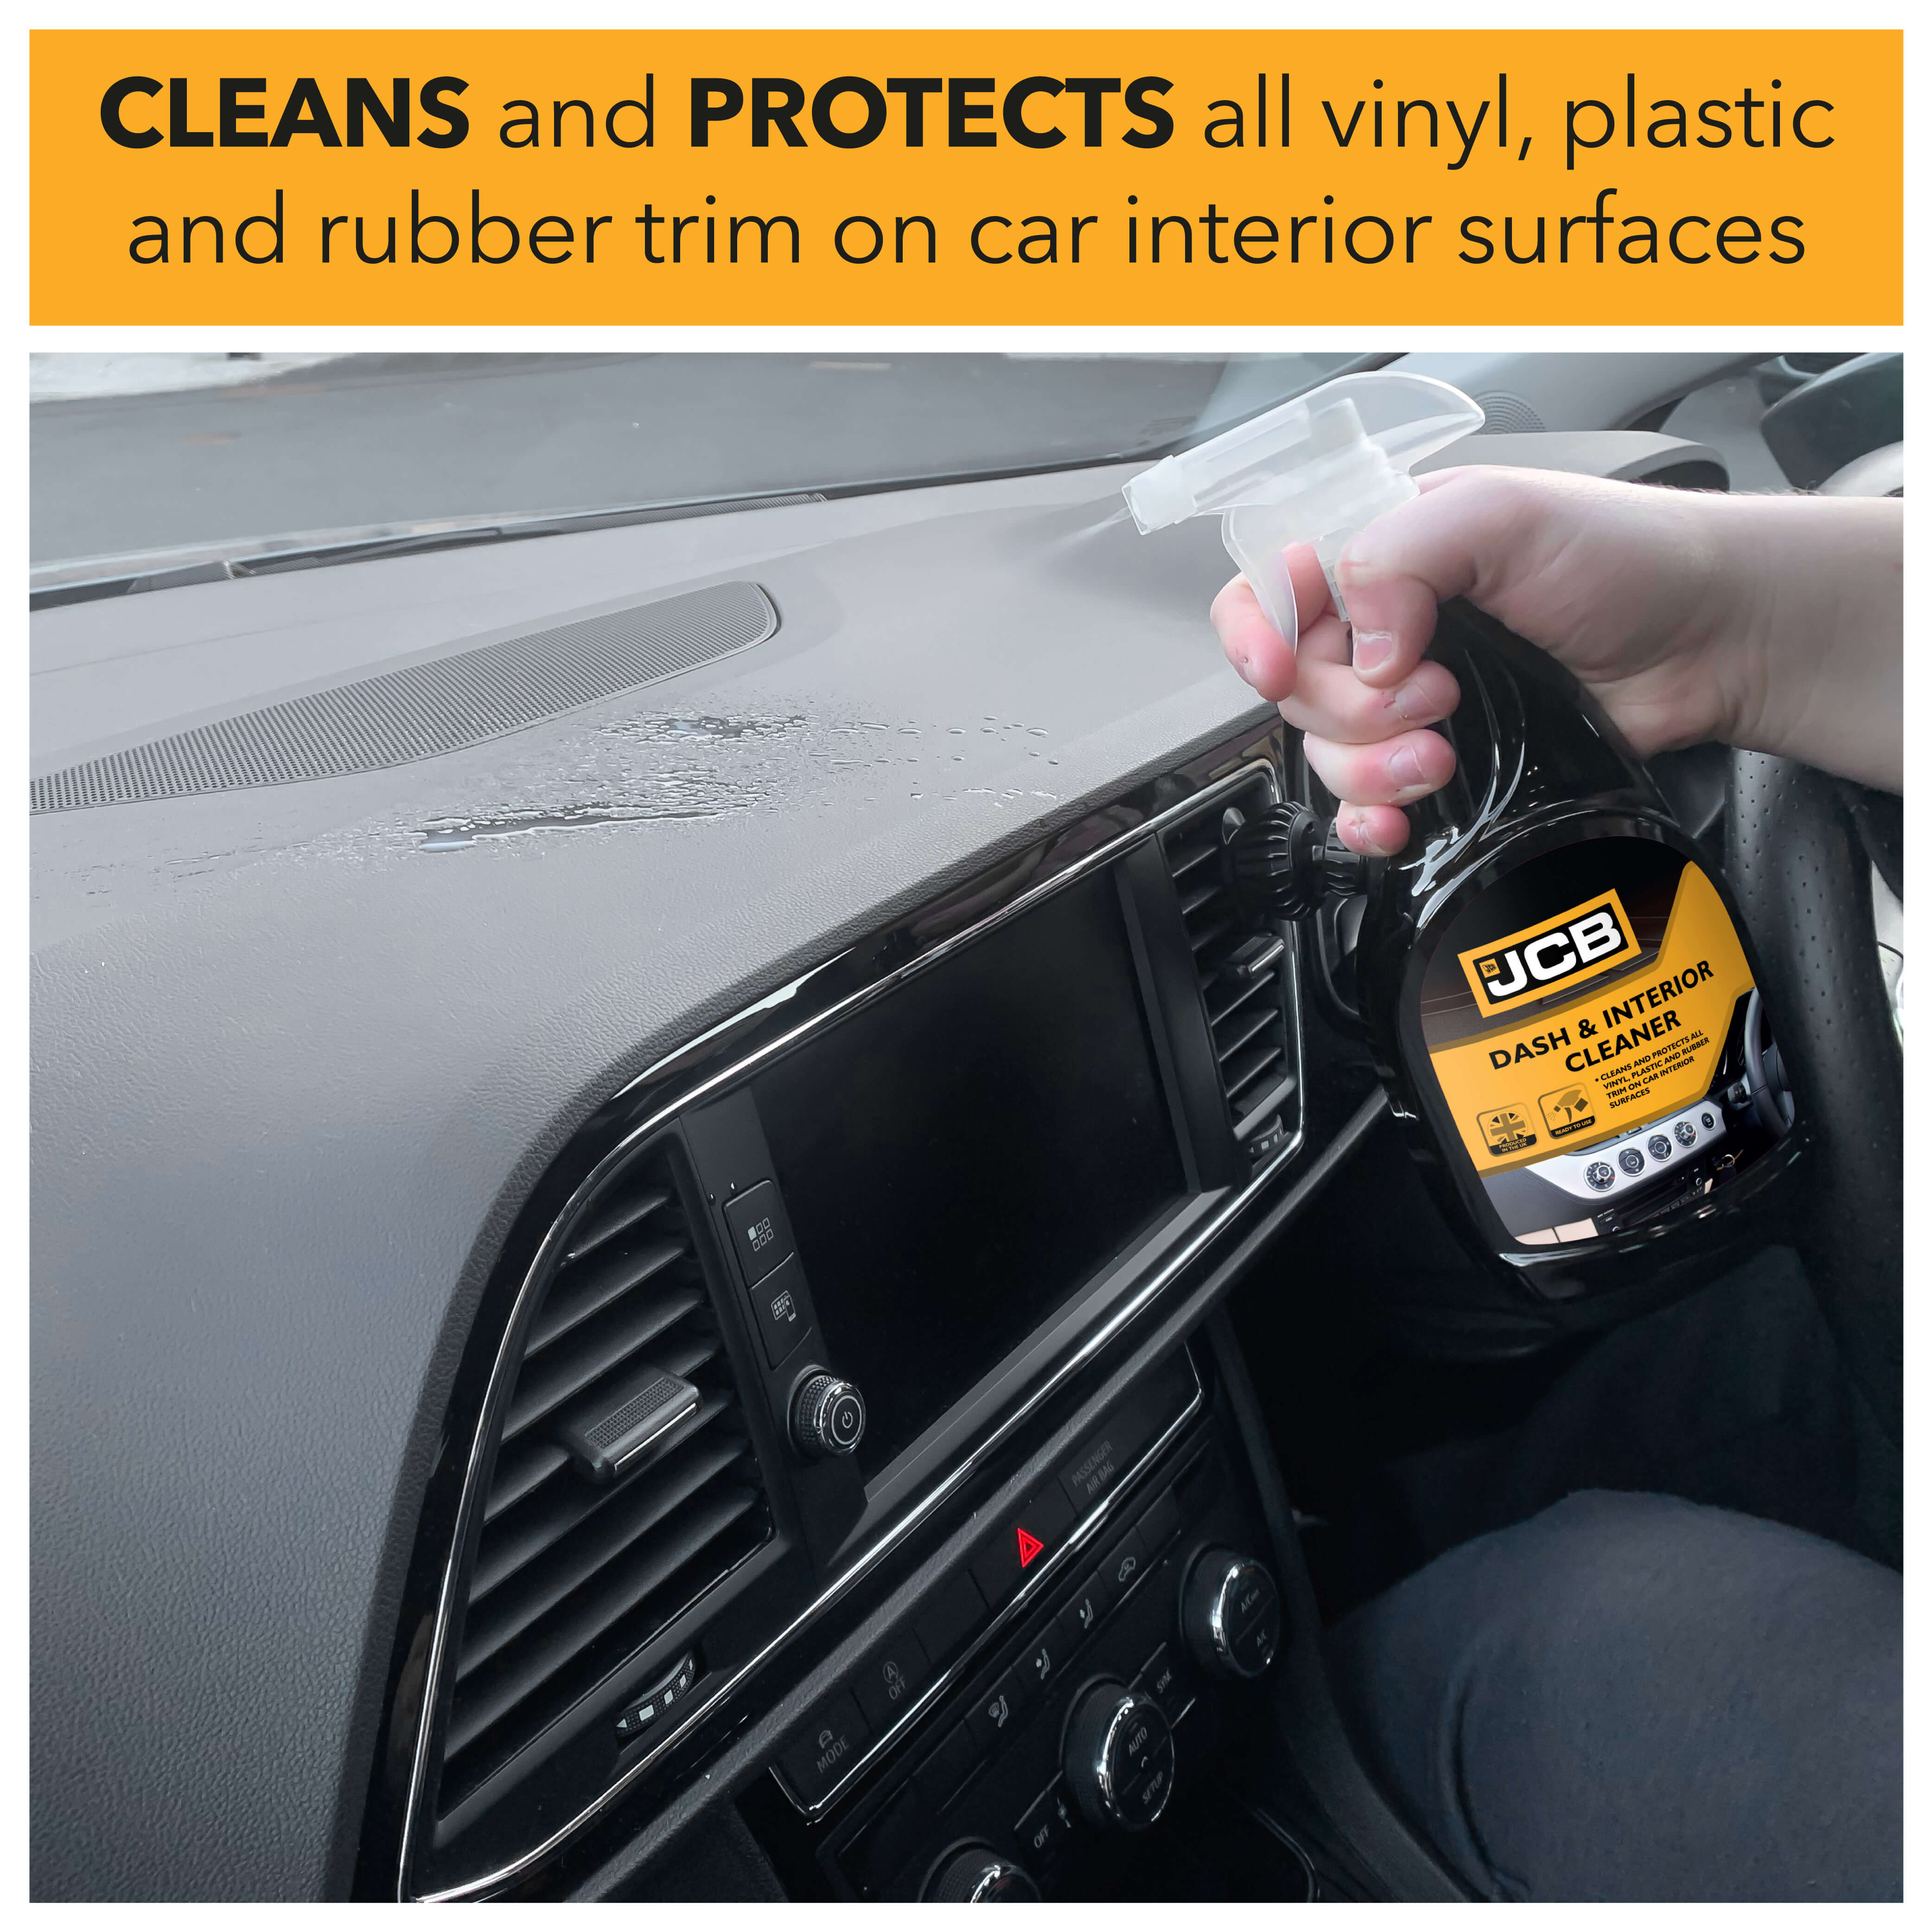 Cleans and protects all vinyl, plastic and rubber trim on car interior surfaces